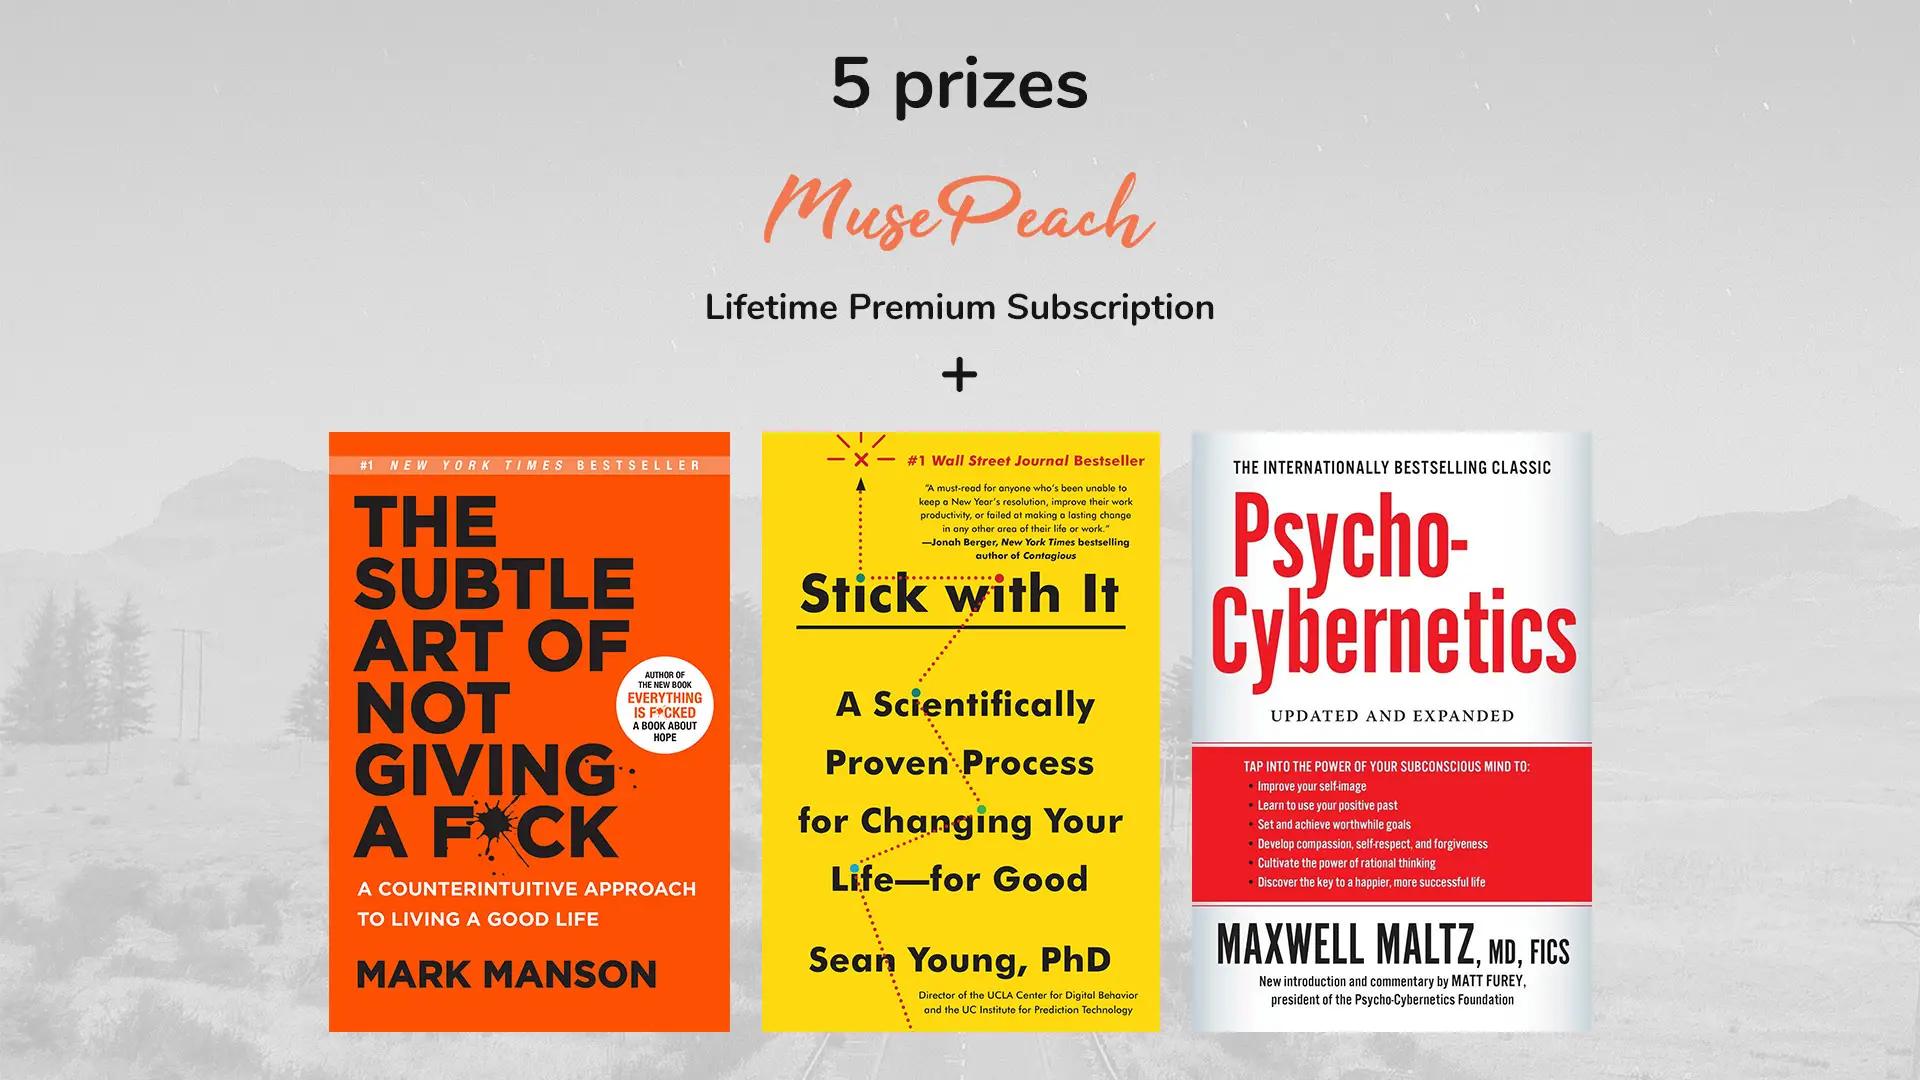 Enter to win a lifetime MusePeach membership and 3 awesome books.